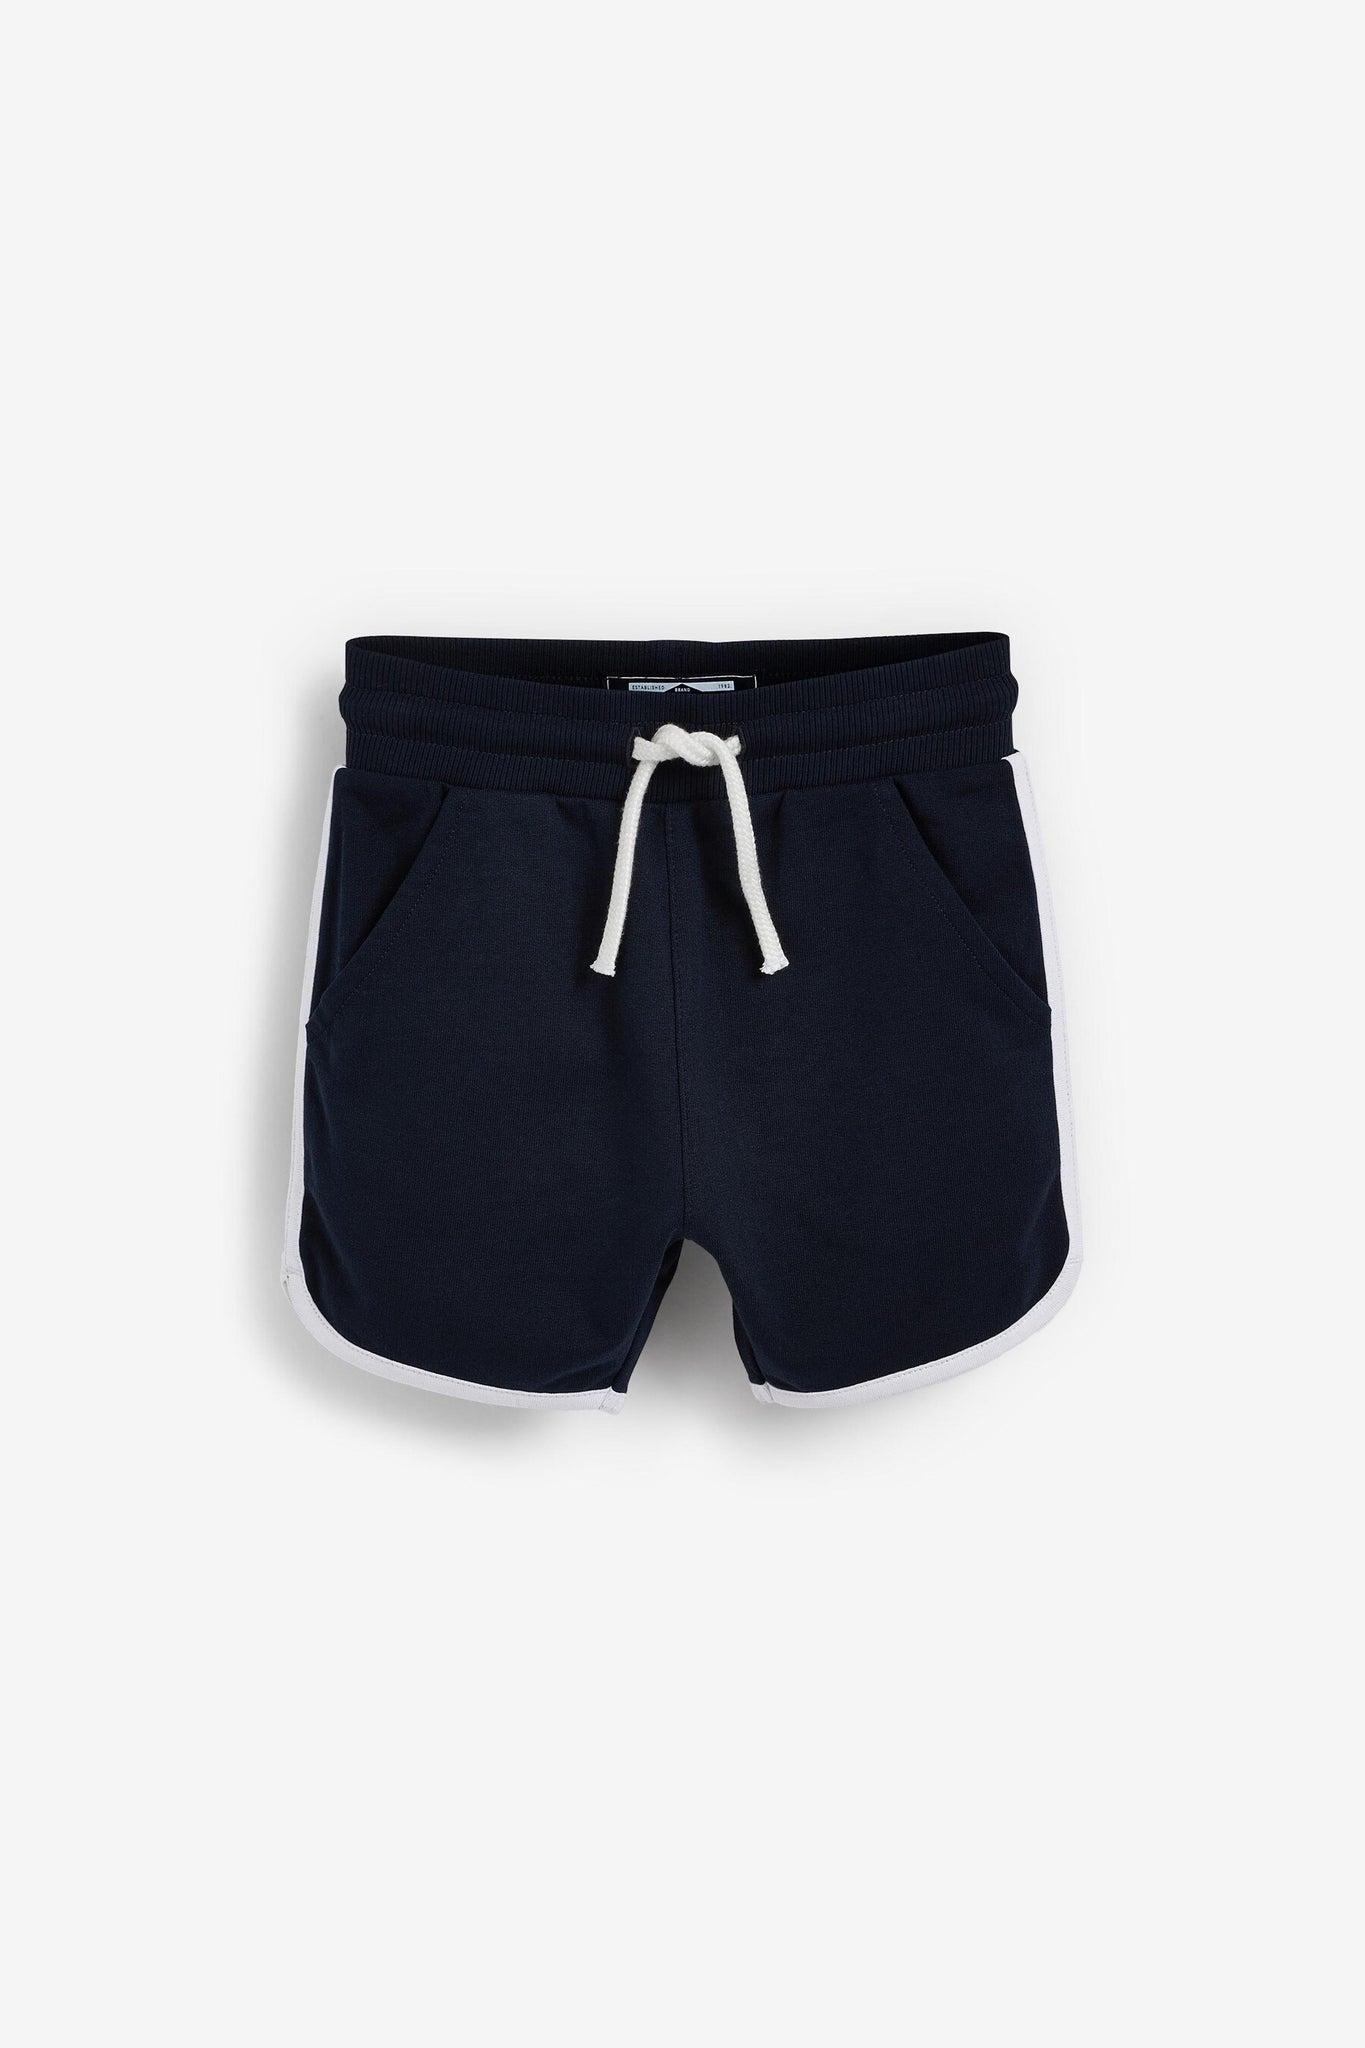 Next Navy Runner Younger Boys Shorts - Stockpoint Apparel Outlet